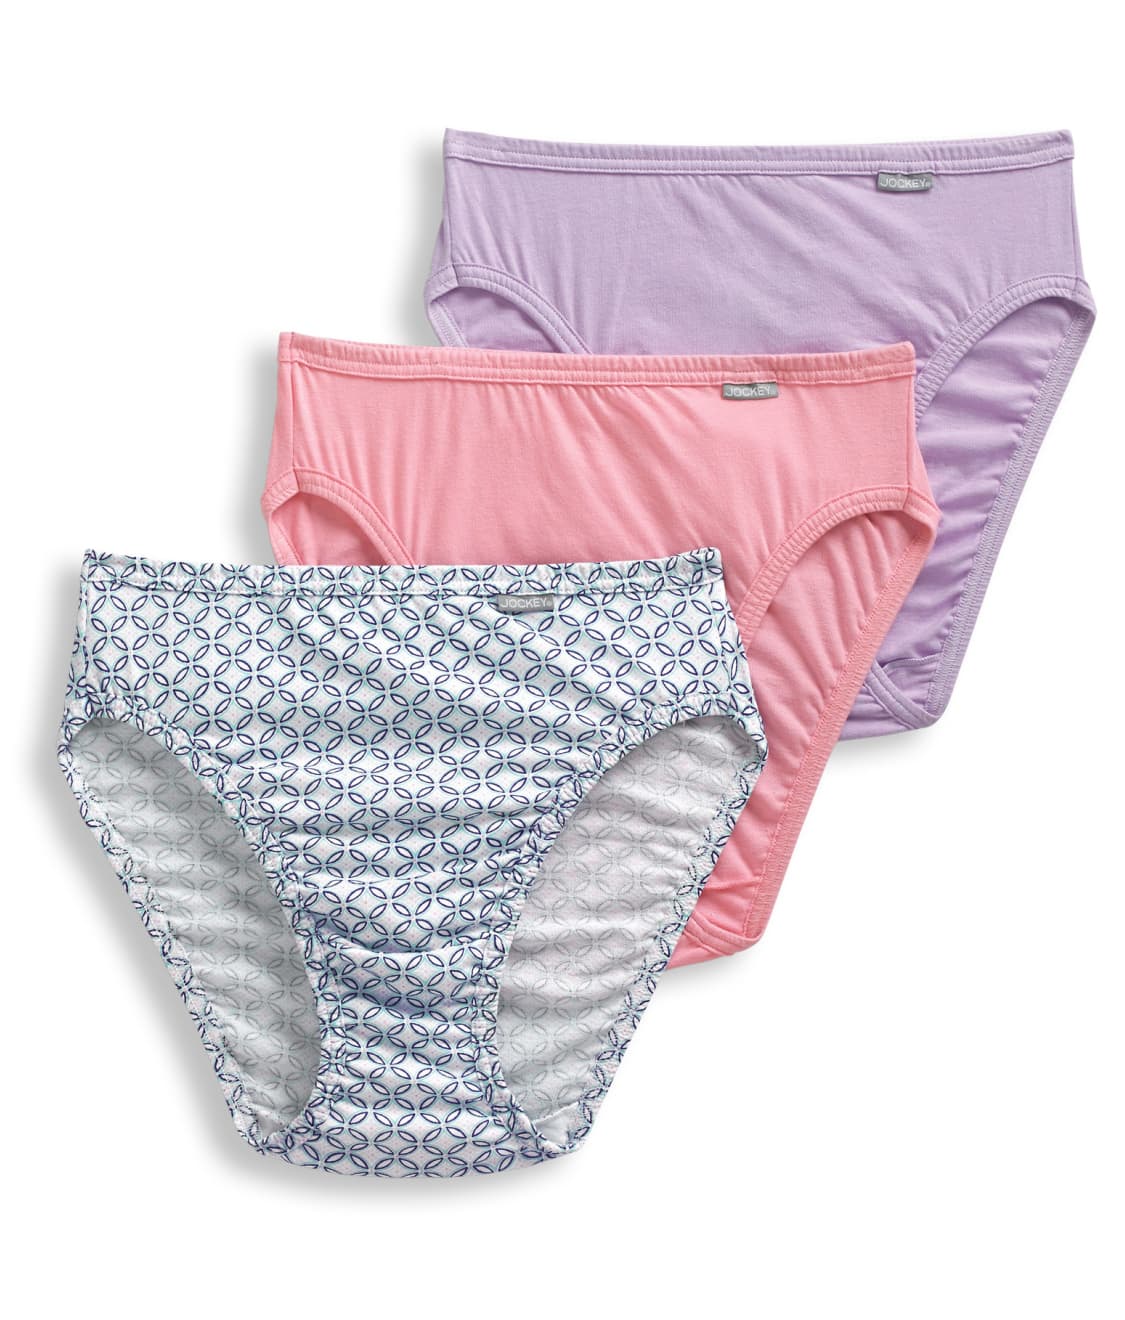 Jockey Plus Size Elance French Cut Brief 3-Pack & Reviews | Bare ...